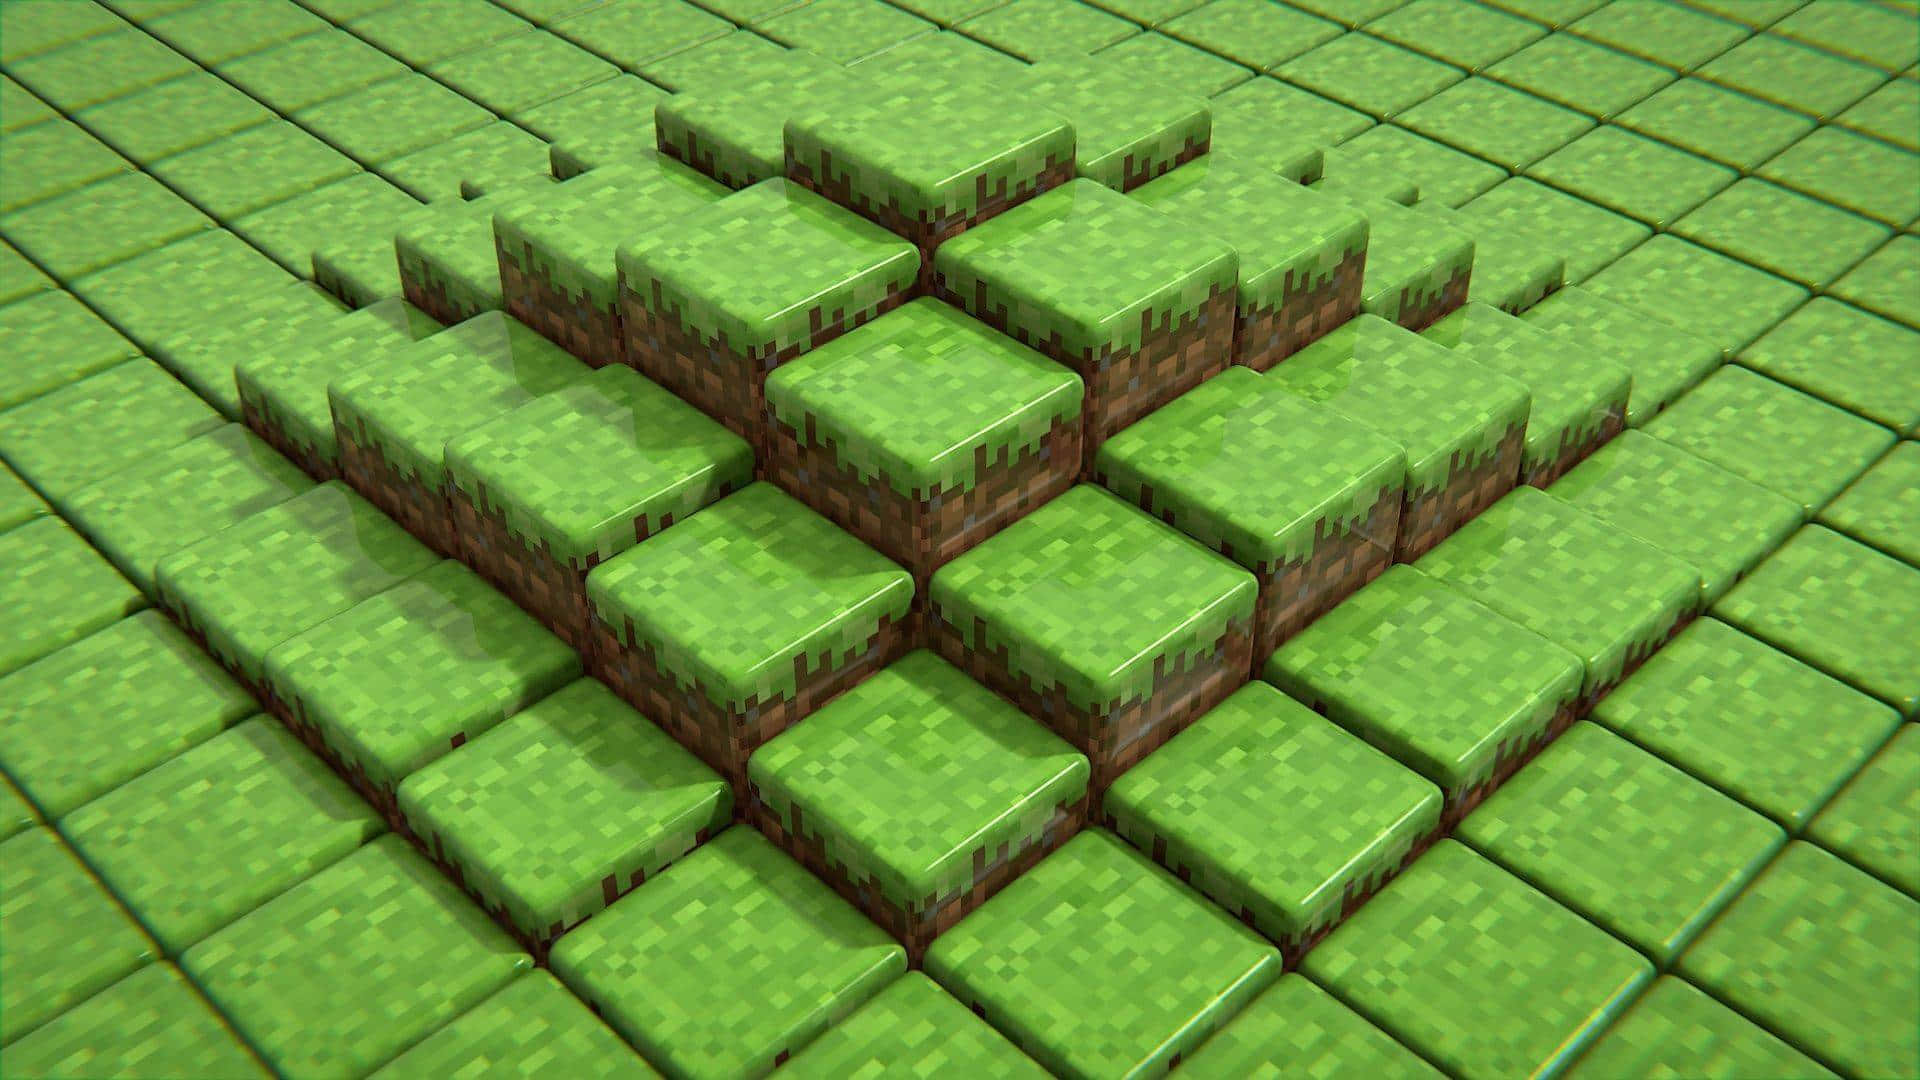 Nature's Variety - Explore the Azure Grasses of Minecraft Wallpaper